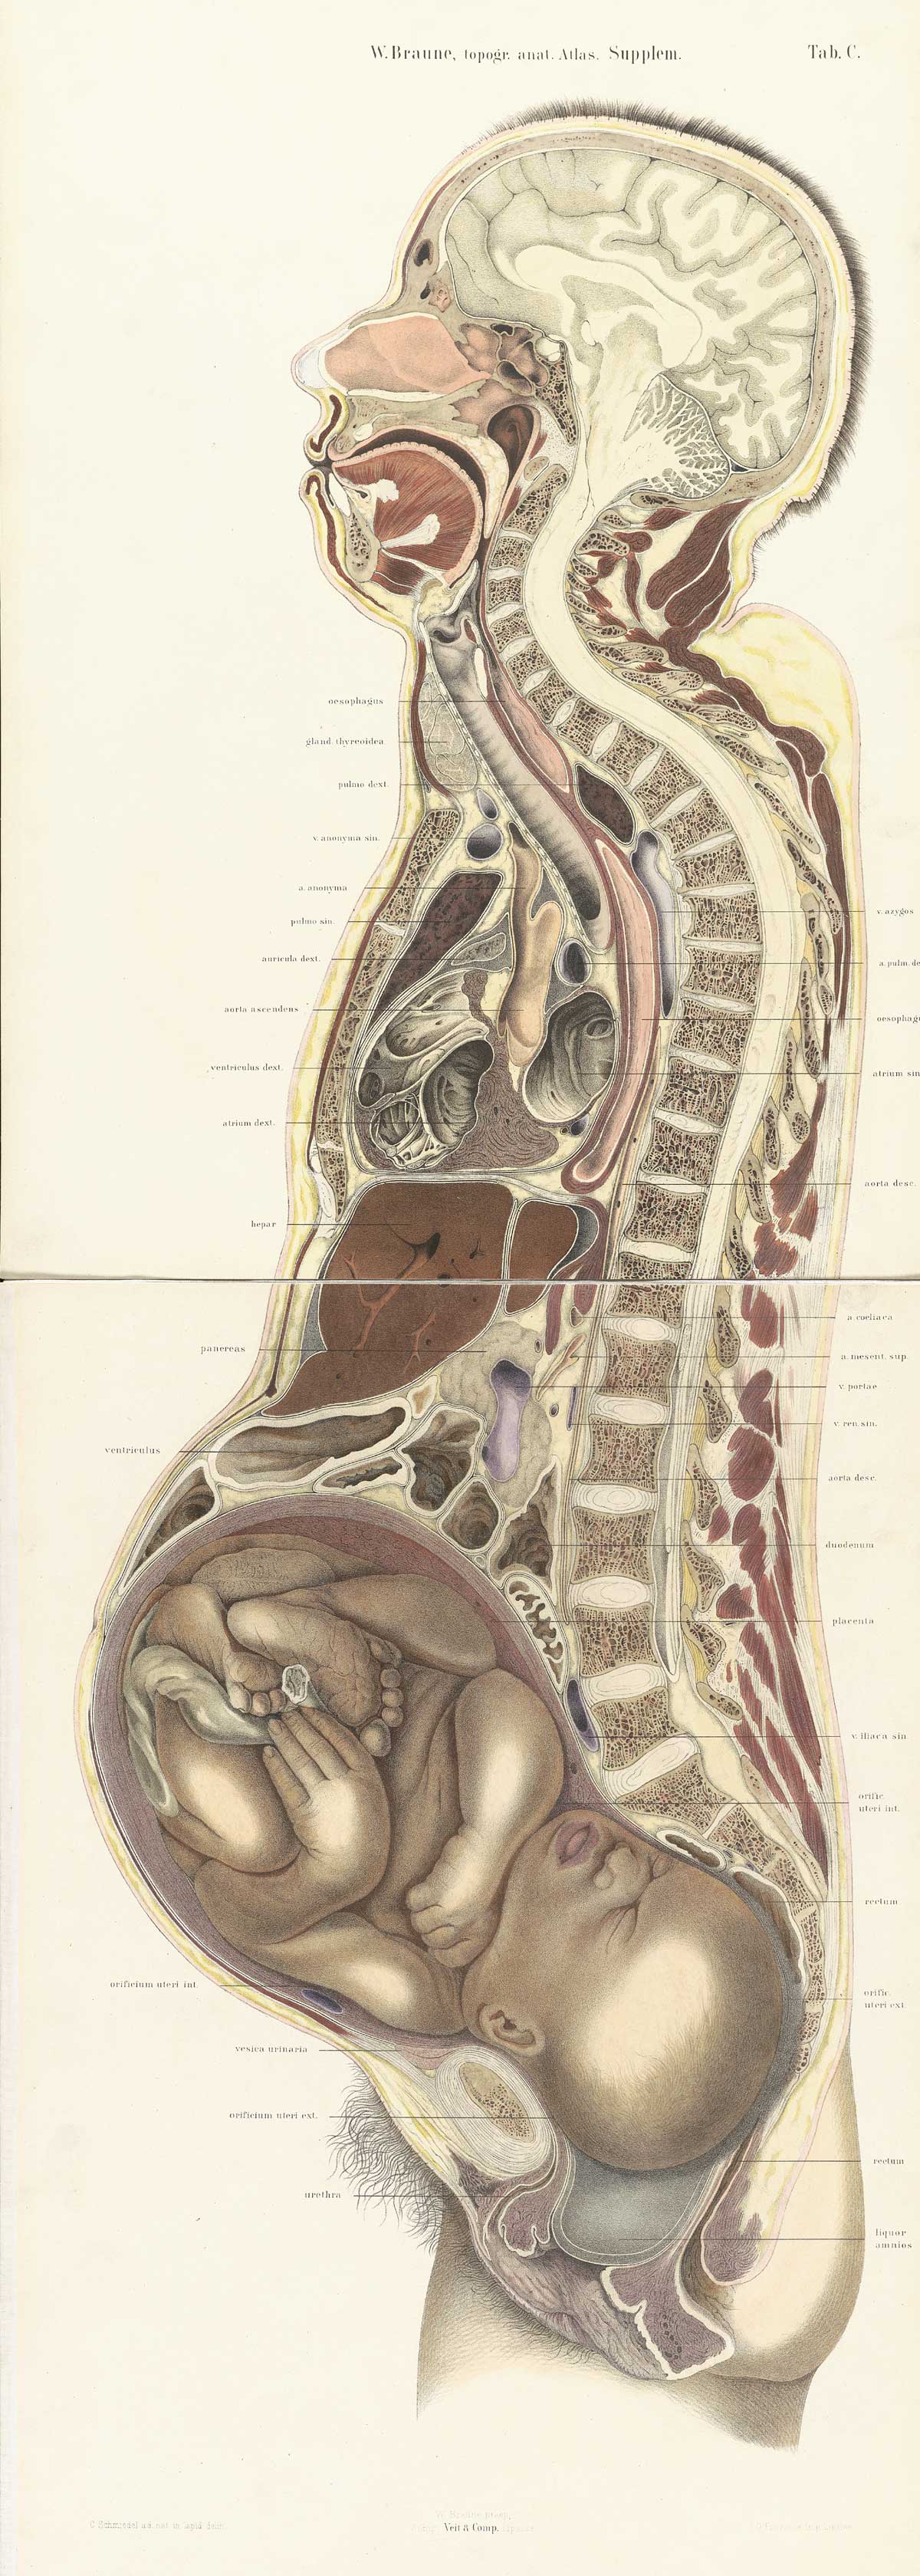 Chromolithograph of pregnant female body cross-section with the subject facing to the left, showing all structures and internal organs of the head, thorax, and abdomen, including fetus in womb nearly to term, from Wilhelm Braune’s Die Lage des Uterus und Foetus Ende der Schwangerschaft, nach durchschnitten an Gefrornen Cadavern, Leipzig, 1872.